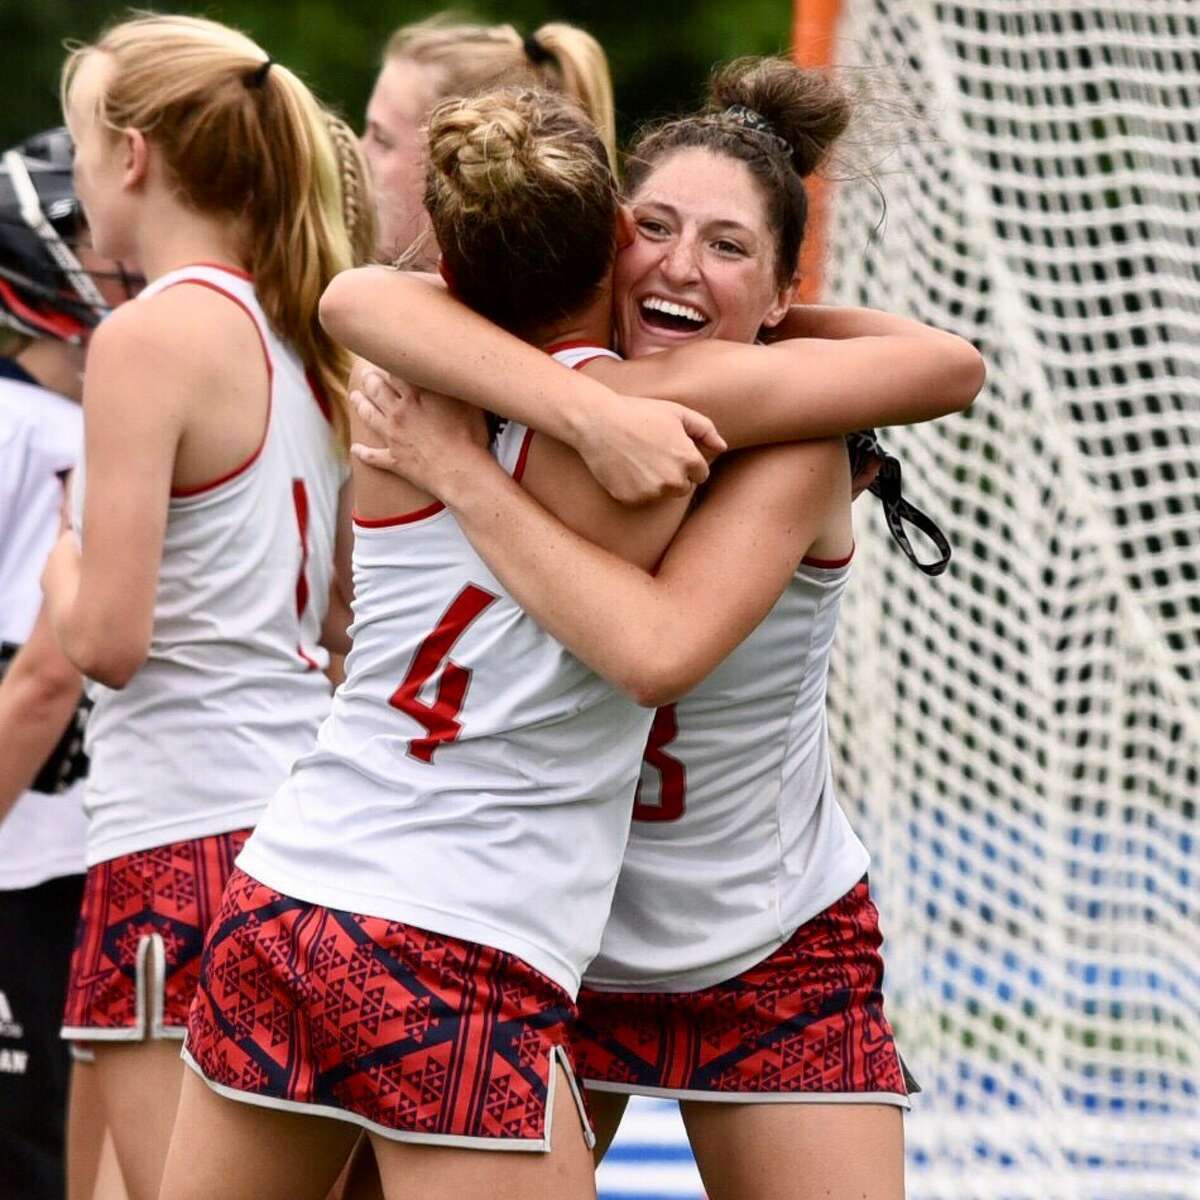 New Fairfield’s Jordan Siemonsen (4) and Reagan Tenaglia celebrate their 11-8 win over Weston in the CIAC girls lacrosse championship on Saturday, June 12, 2021 at Bunnell High School in Stratford, Conn.